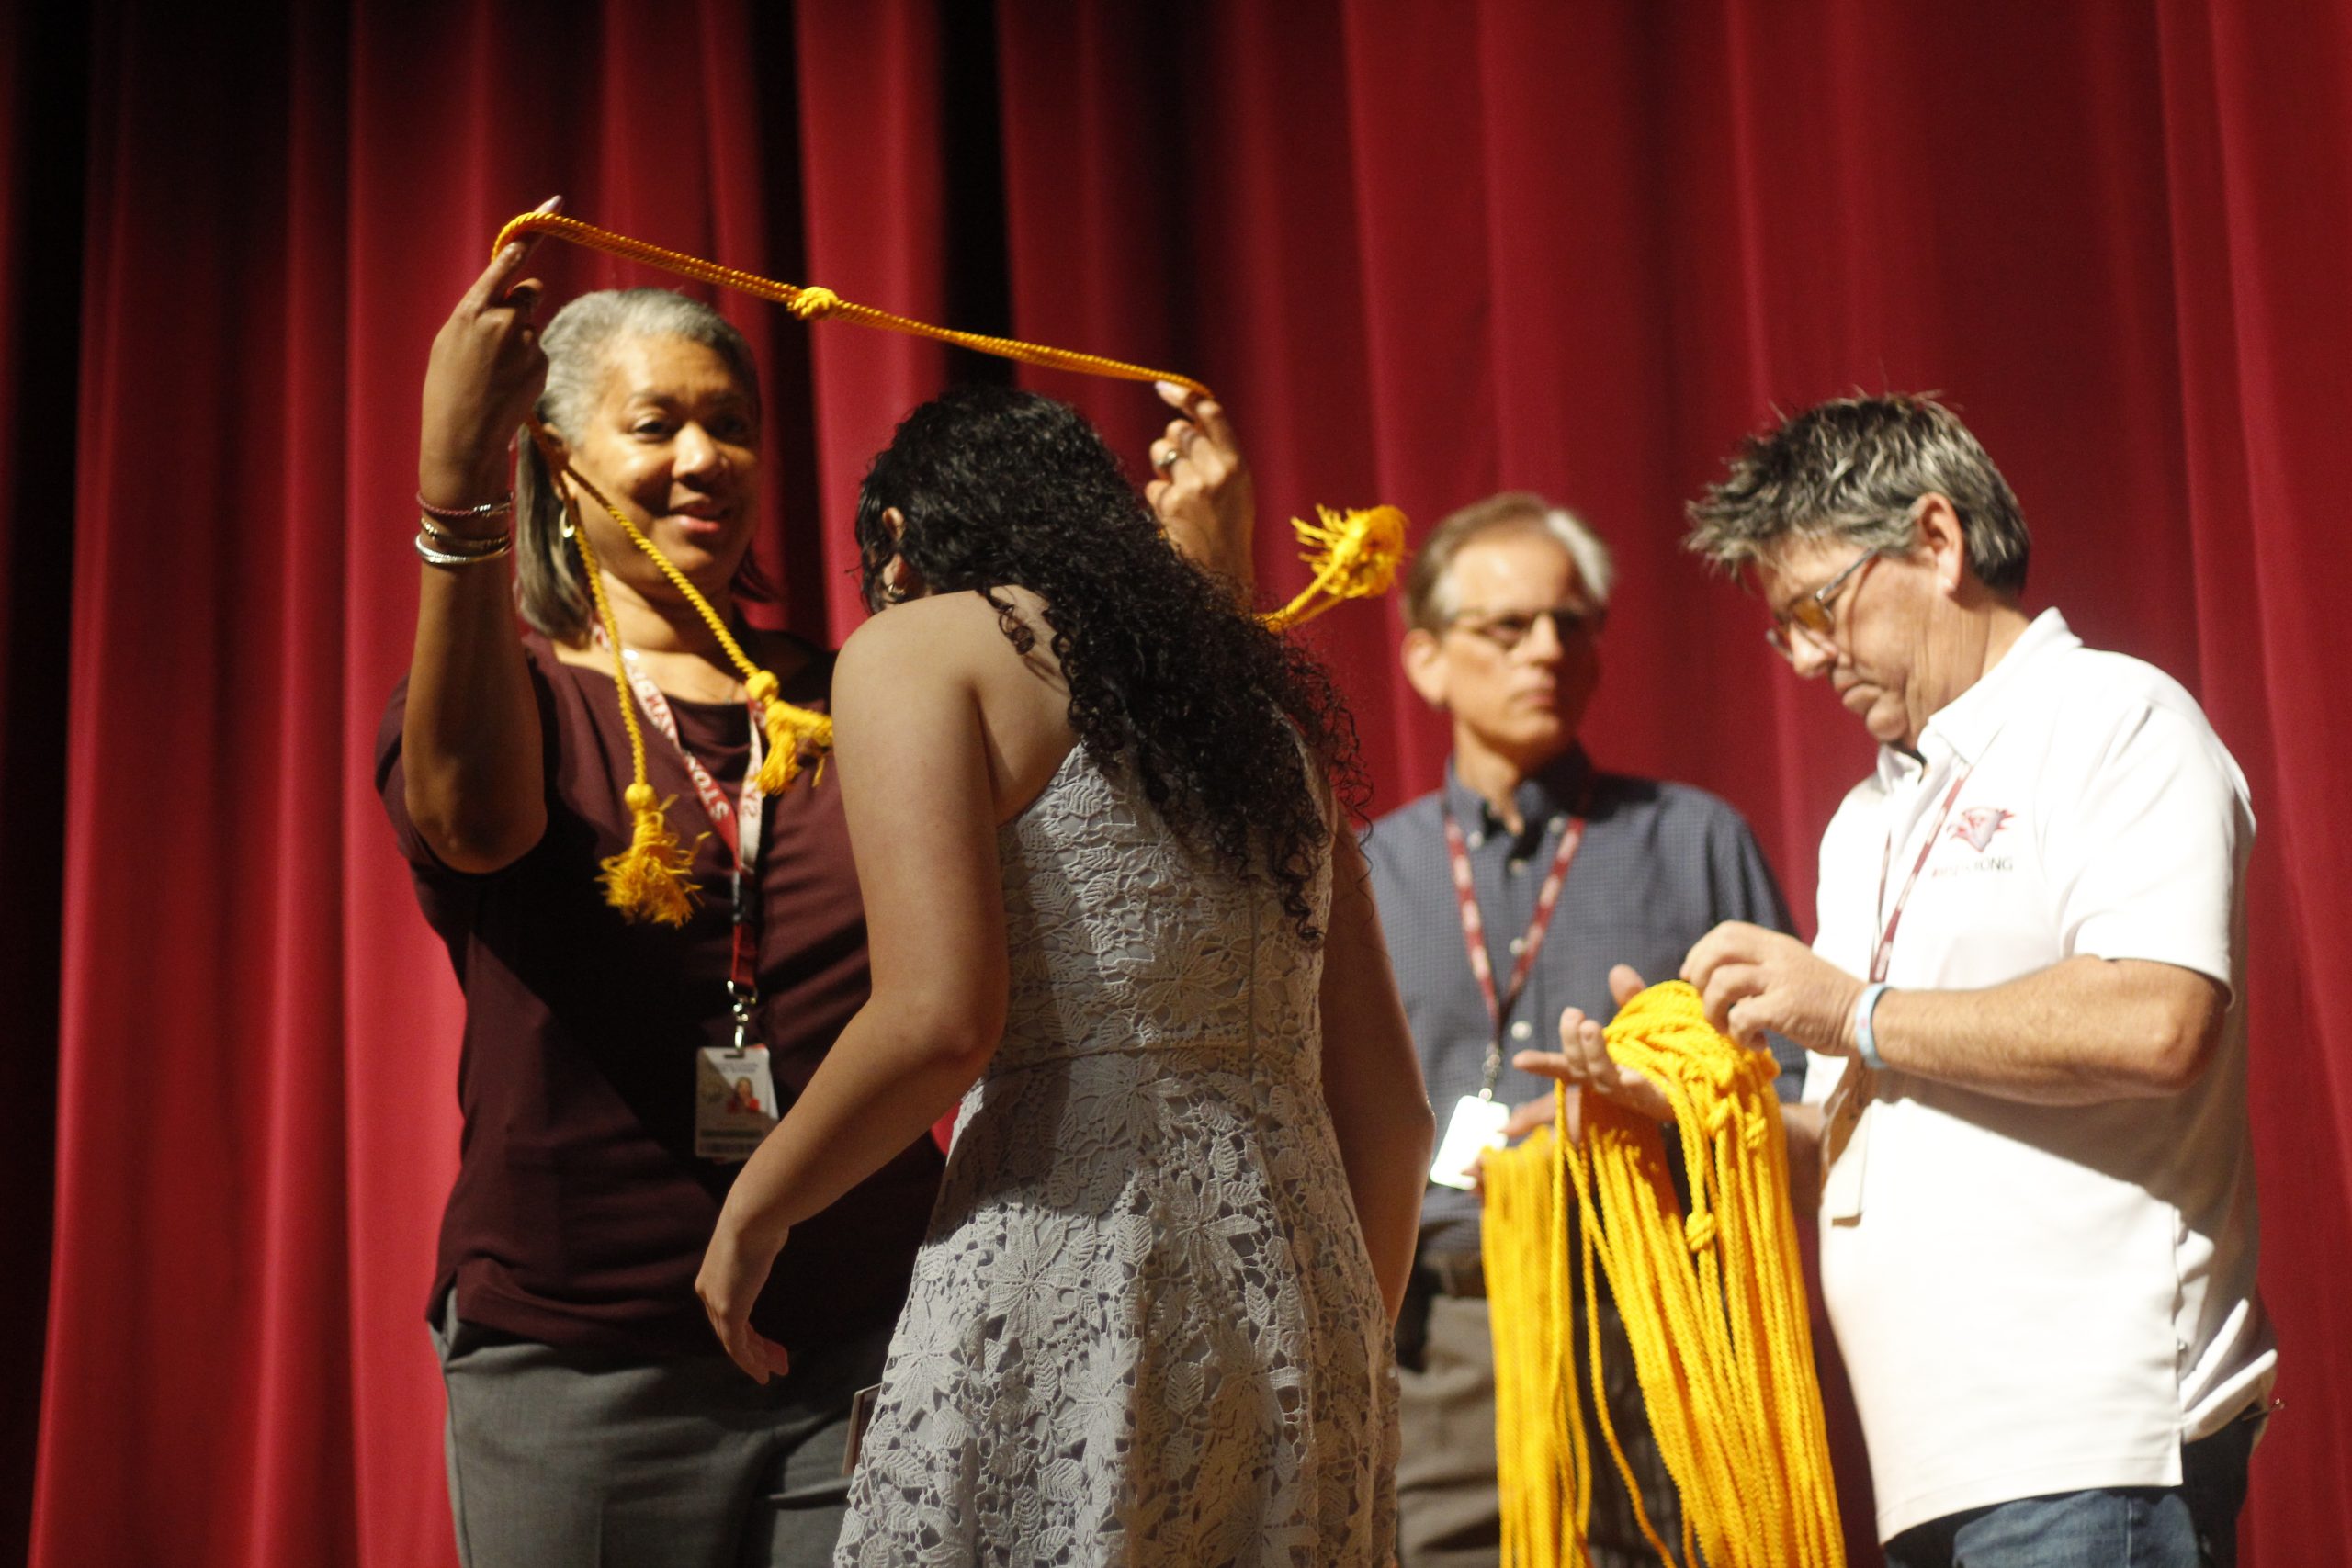 Principal Hall presents graduating class with cords for upcoming graduation. Photo by Kaleela Rosenthal  